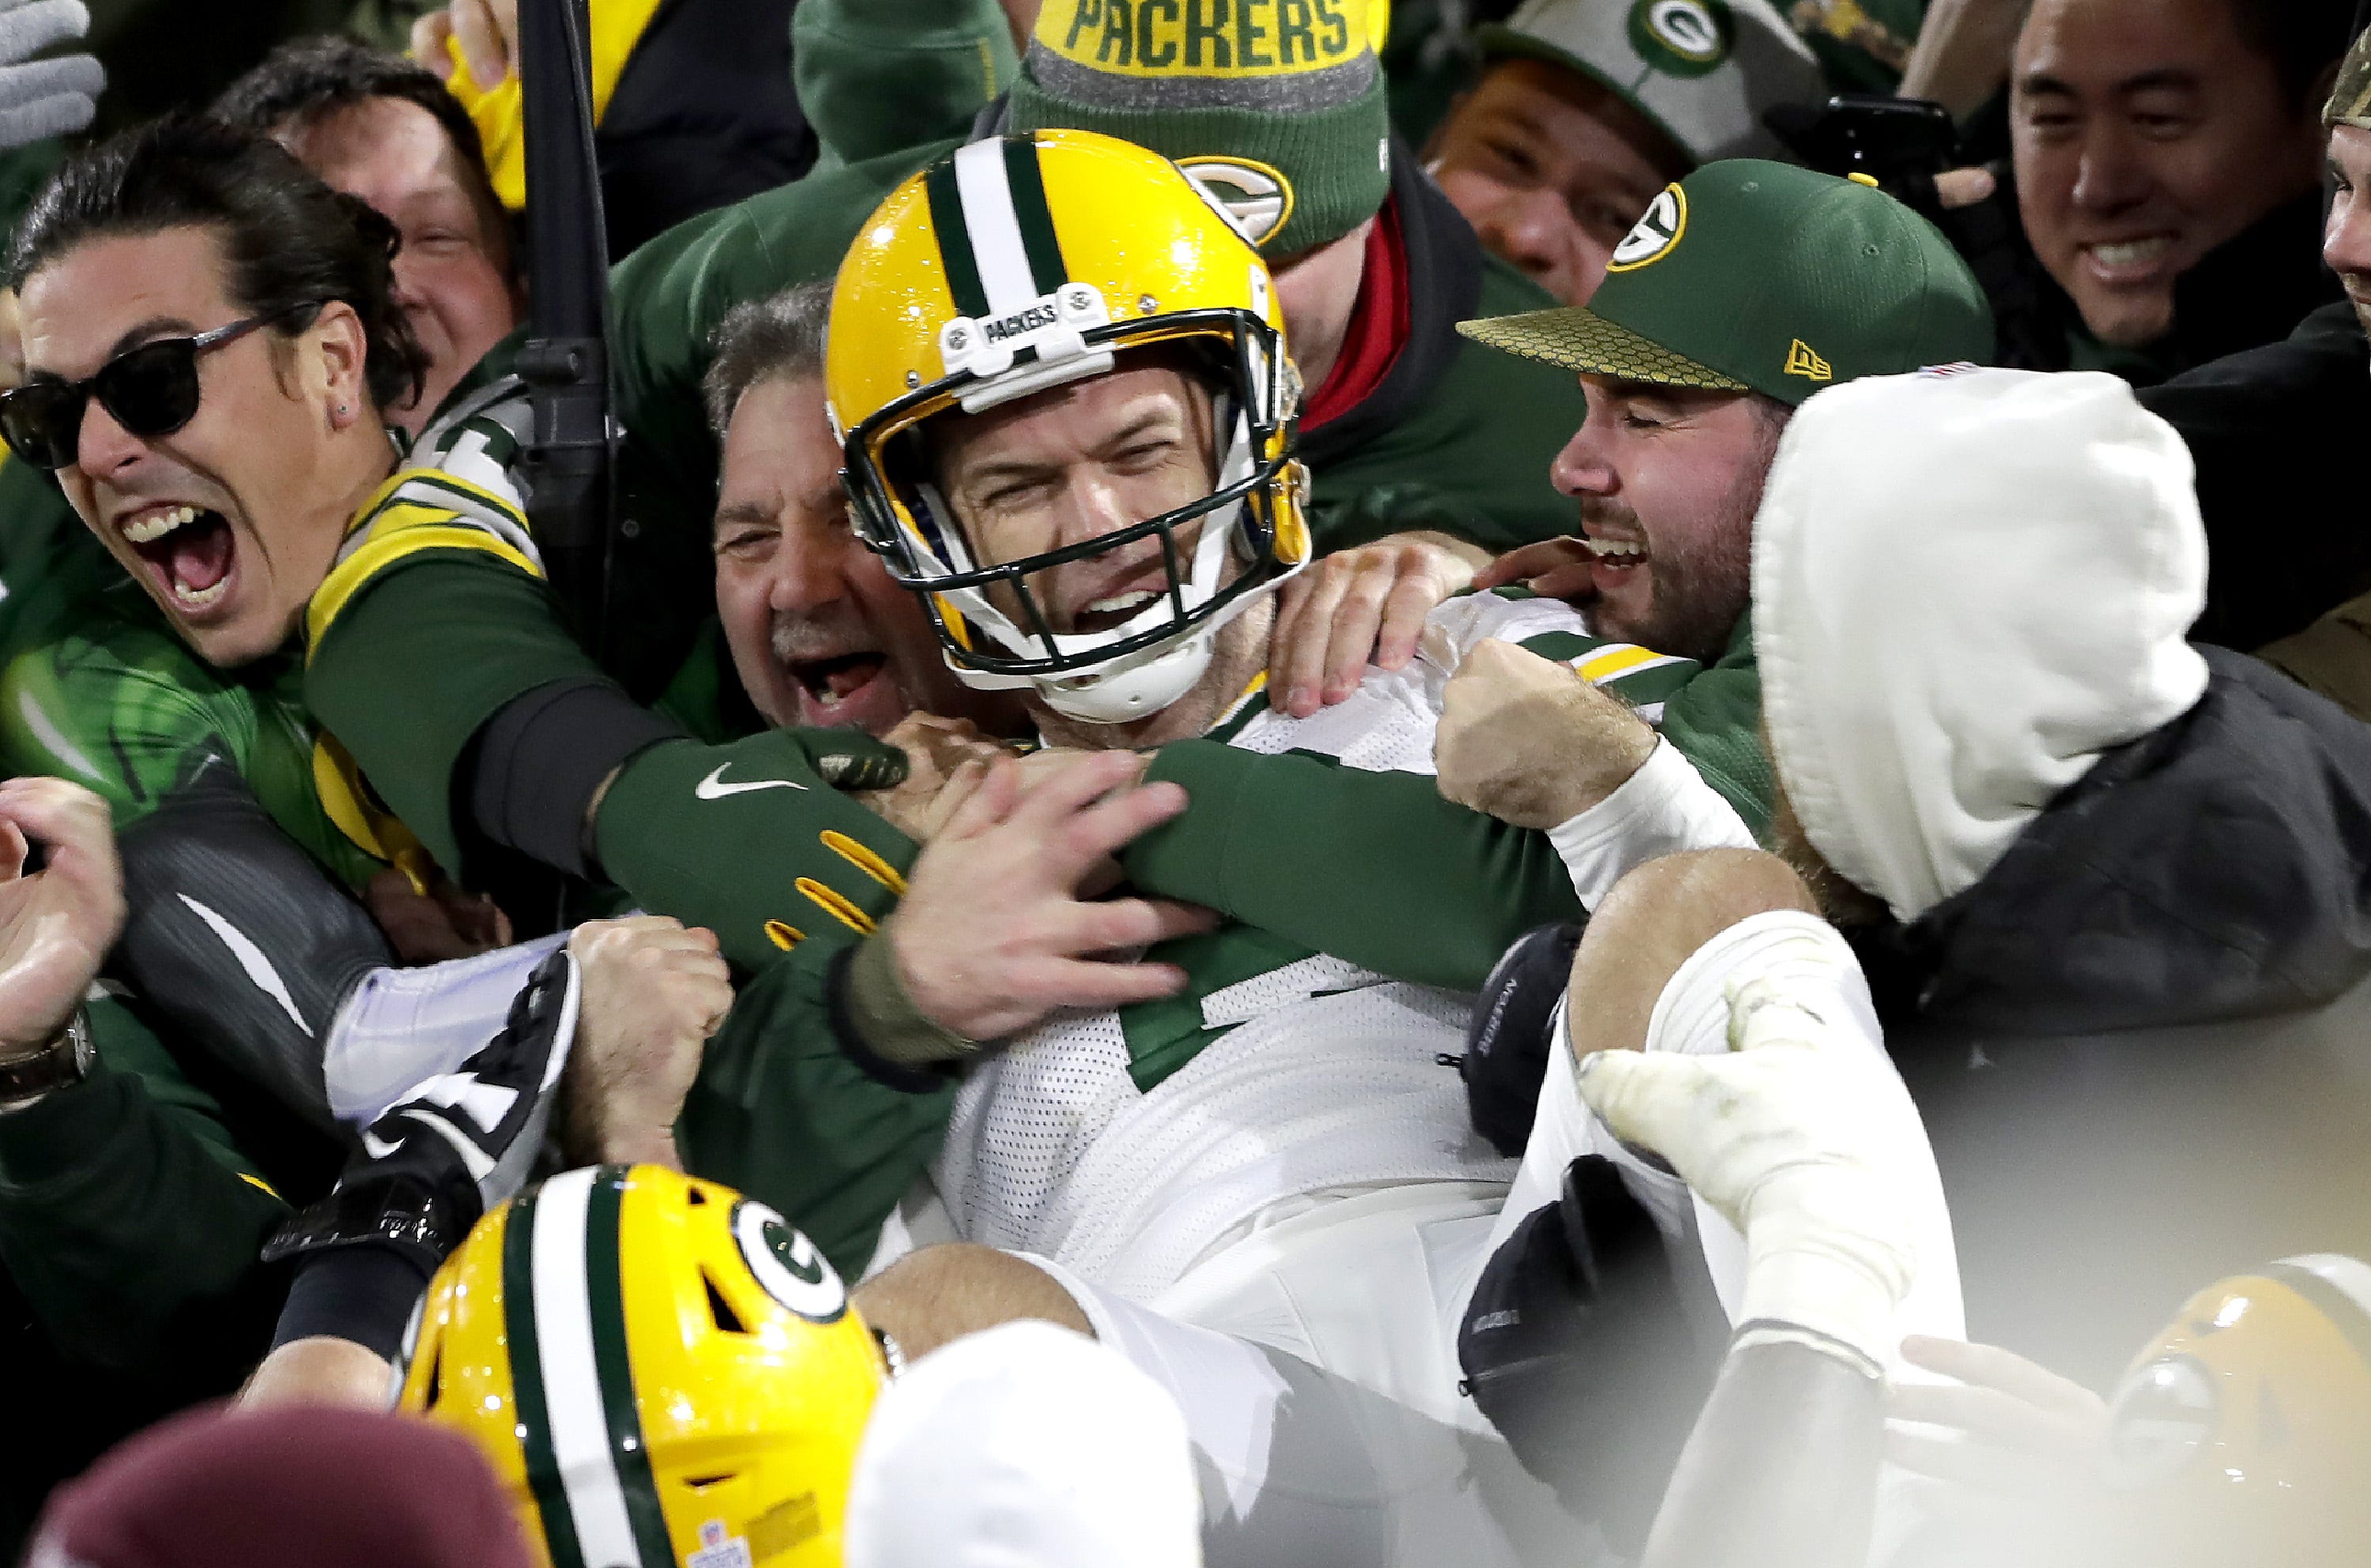 Green Bay Packers kicker Mason Crosby (2) celebrates with a Lambeau Leap after kicking the game winning field goal against the Detroit Lions during their football game Monday October 14, 2019, at Lambeau Field in Green Bay, Wis. The packers defeated the Lions 23 to 22.